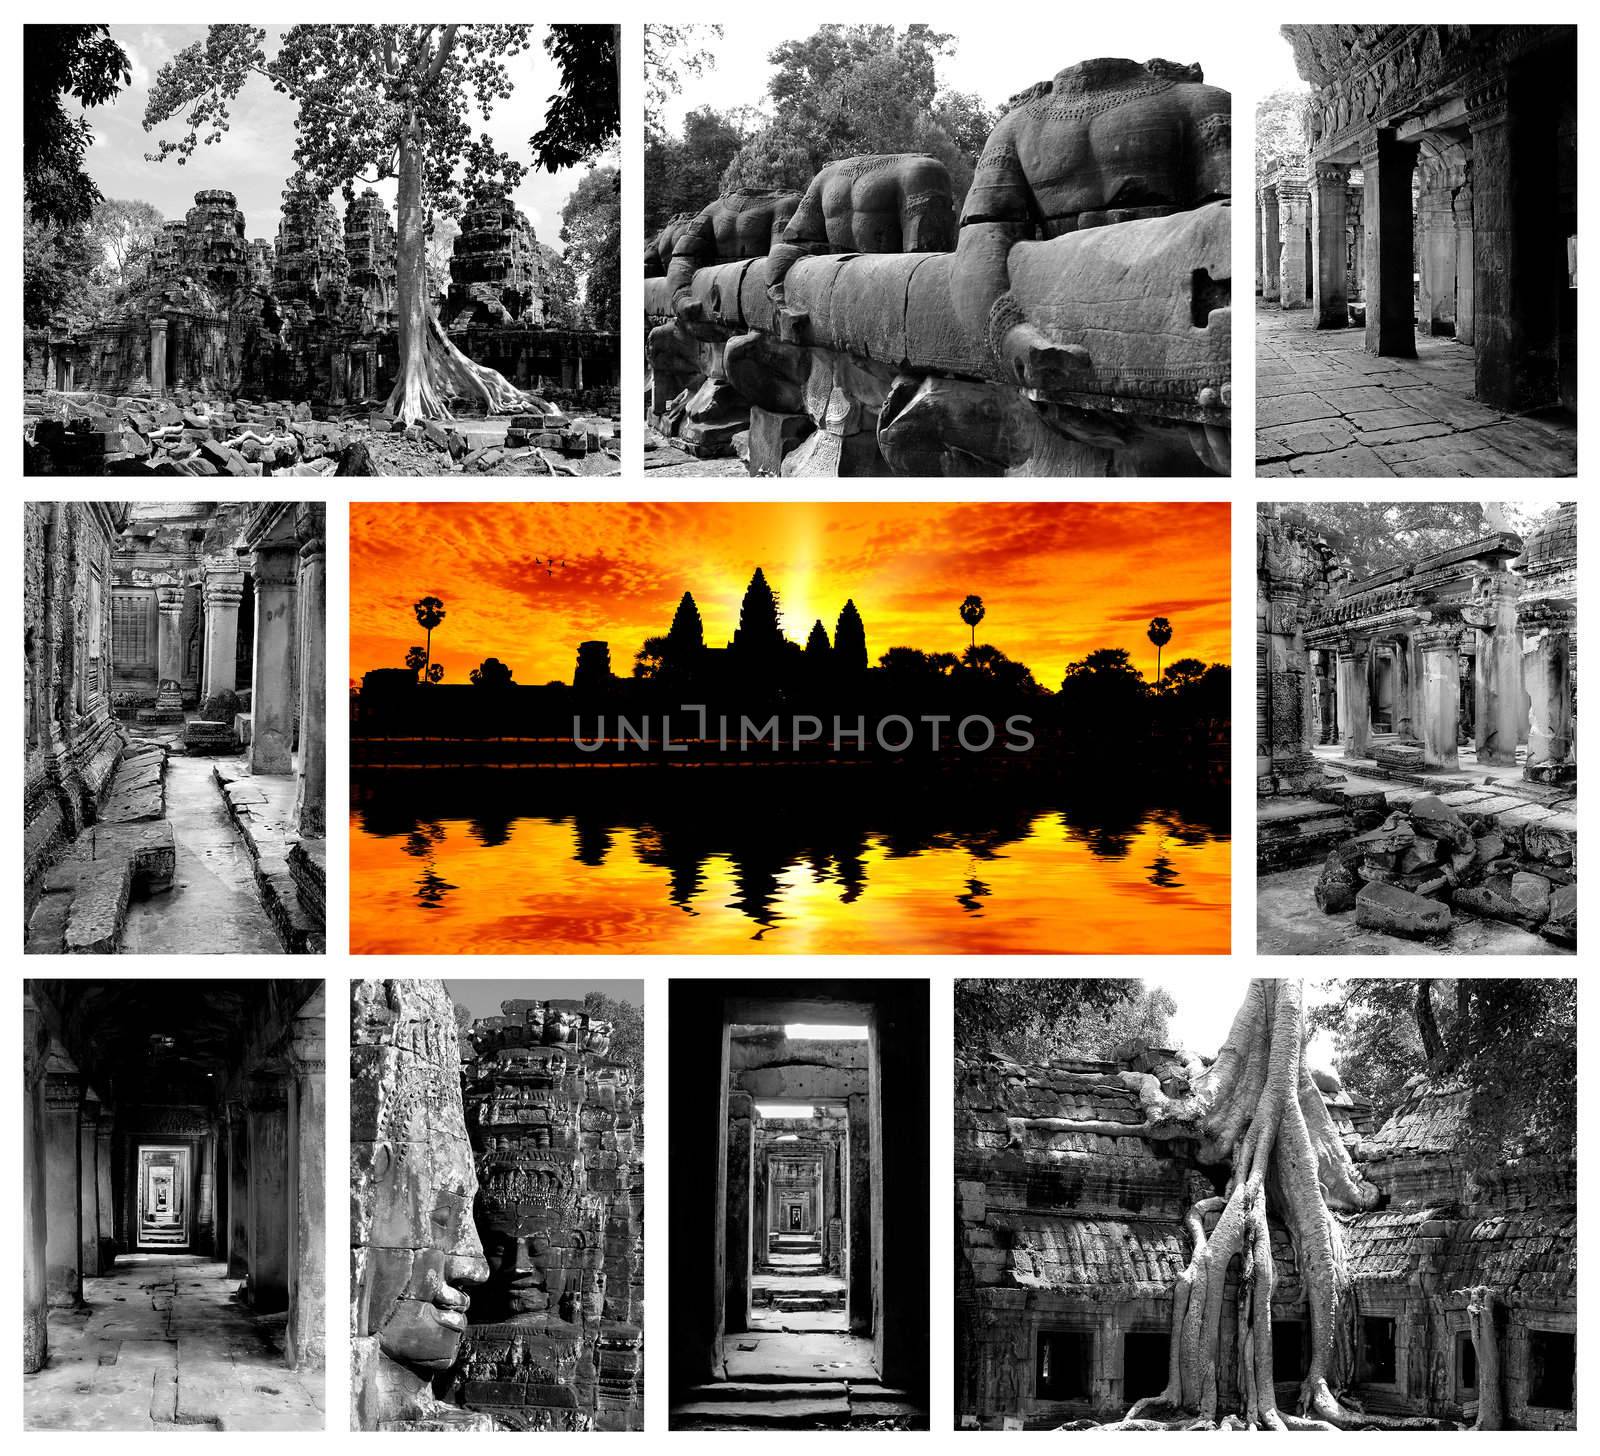 Collage of the Angkor temple ruins in Cambodia